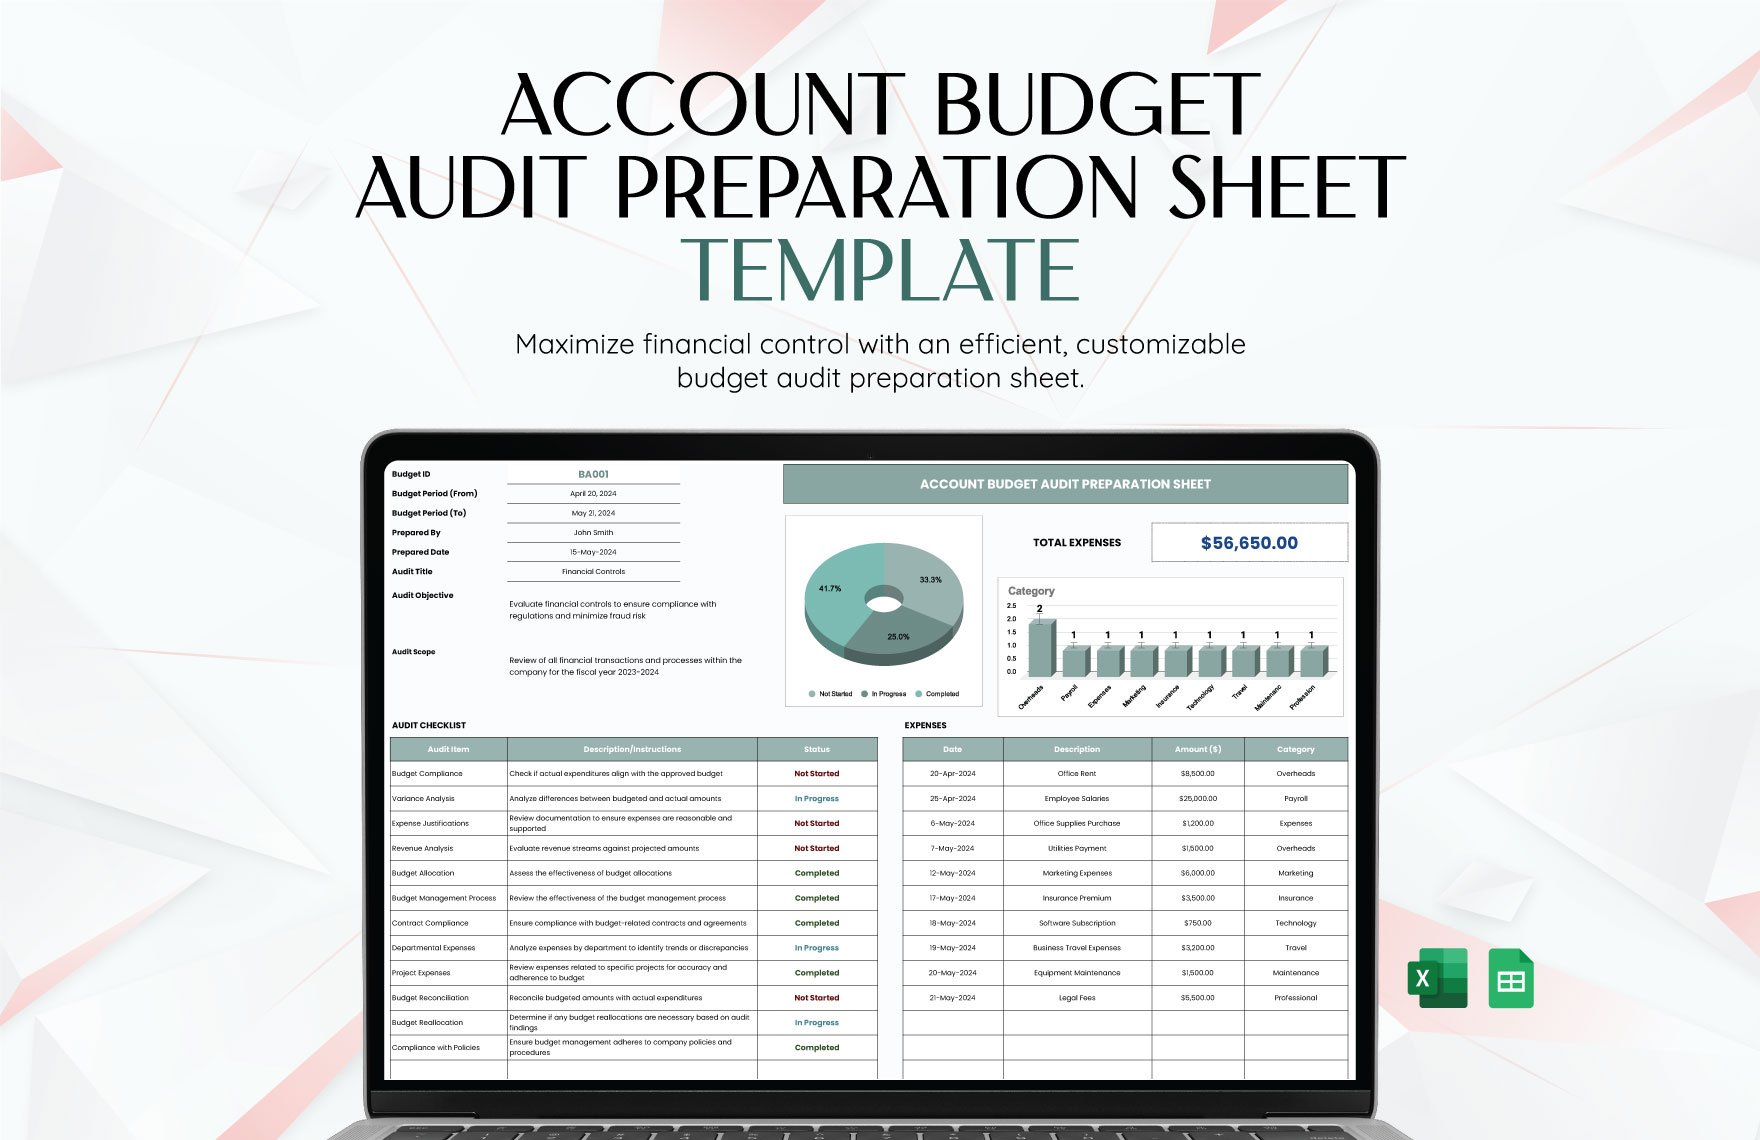 Account Budget Audit Preparation Sheet Template in Excel, Google Sheets